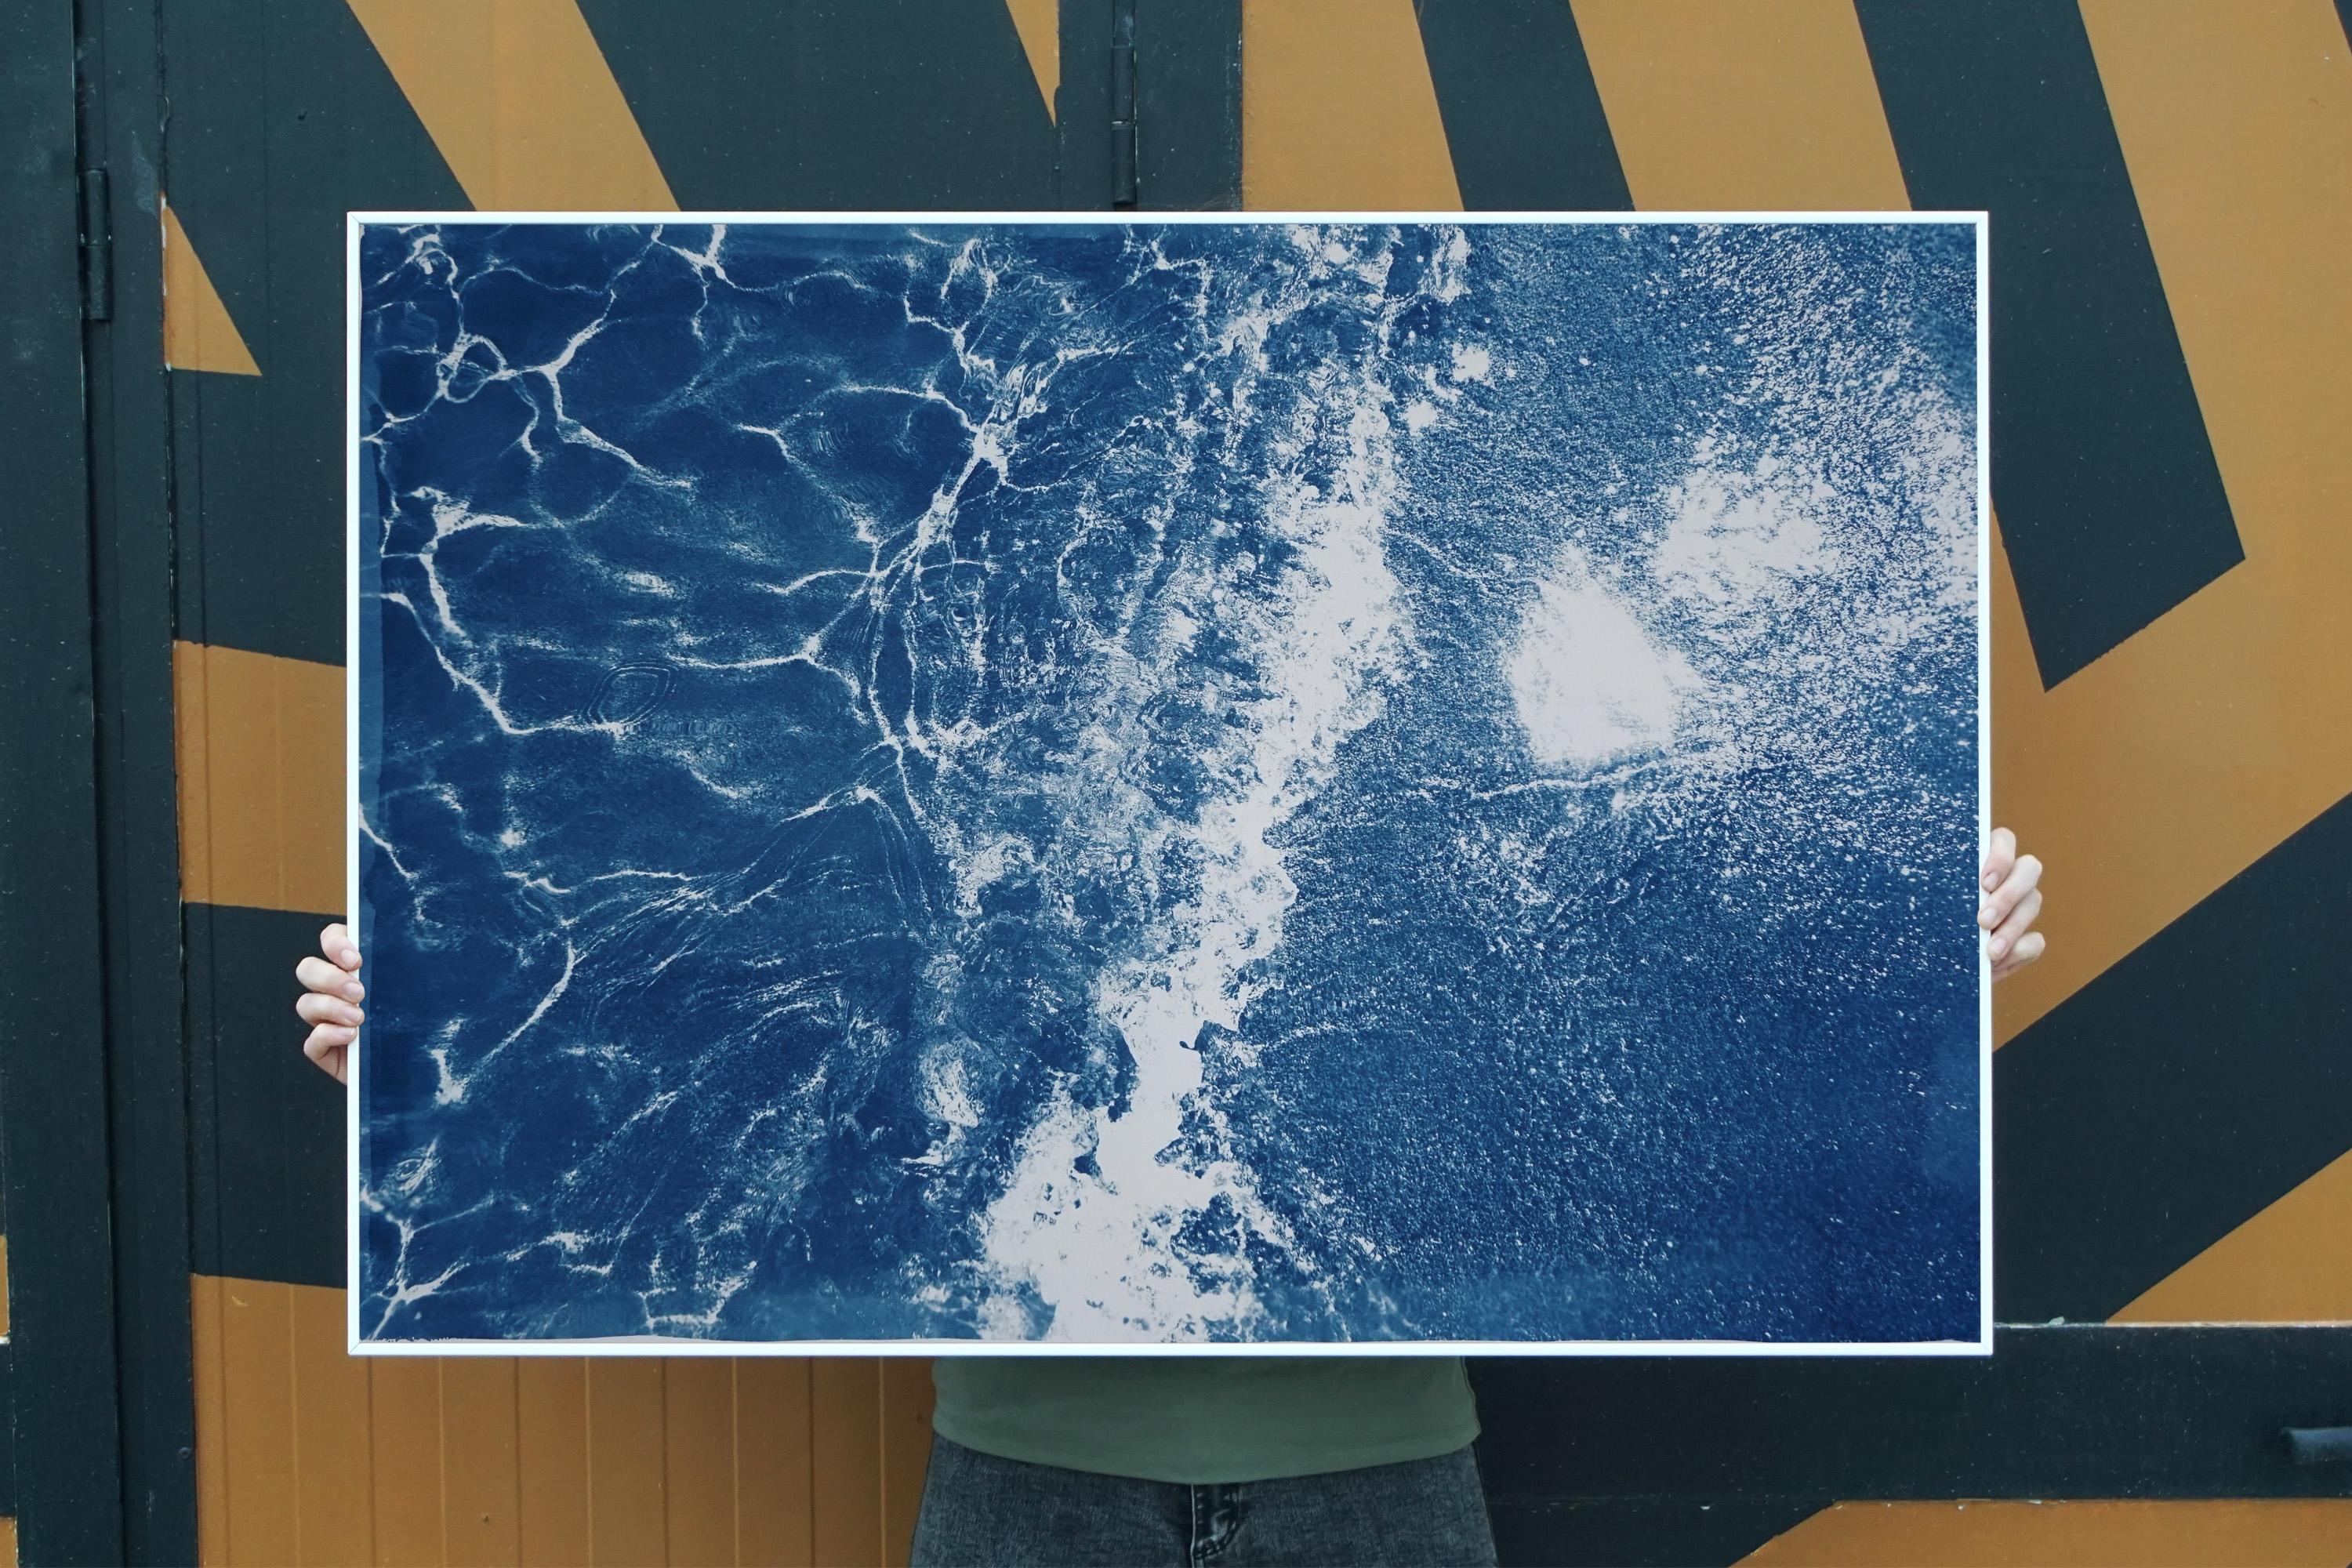 Caribbean Sandy Shore, Cyanotype on Watercolor Paper, 100x70cm, Beach House Art - Contemporary Photograph by Kind of Cyan